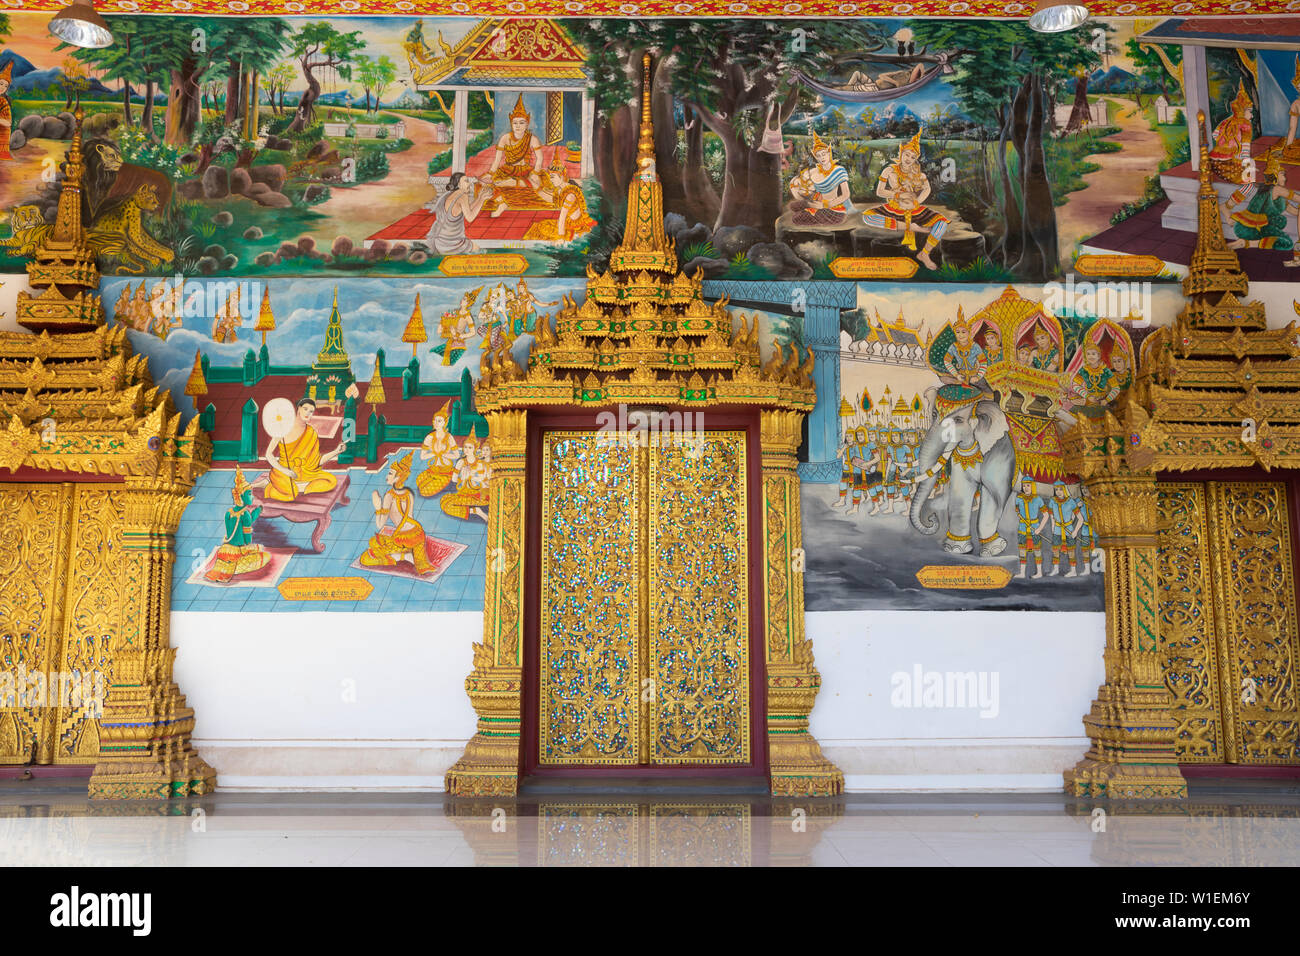 Murals and golden doors at the entrance of the Wat Inpeng Buddhist temple, Rue Samsenthai, Vientiane, Laos, Indochina, Southeast Asia, Asia Stock Photo